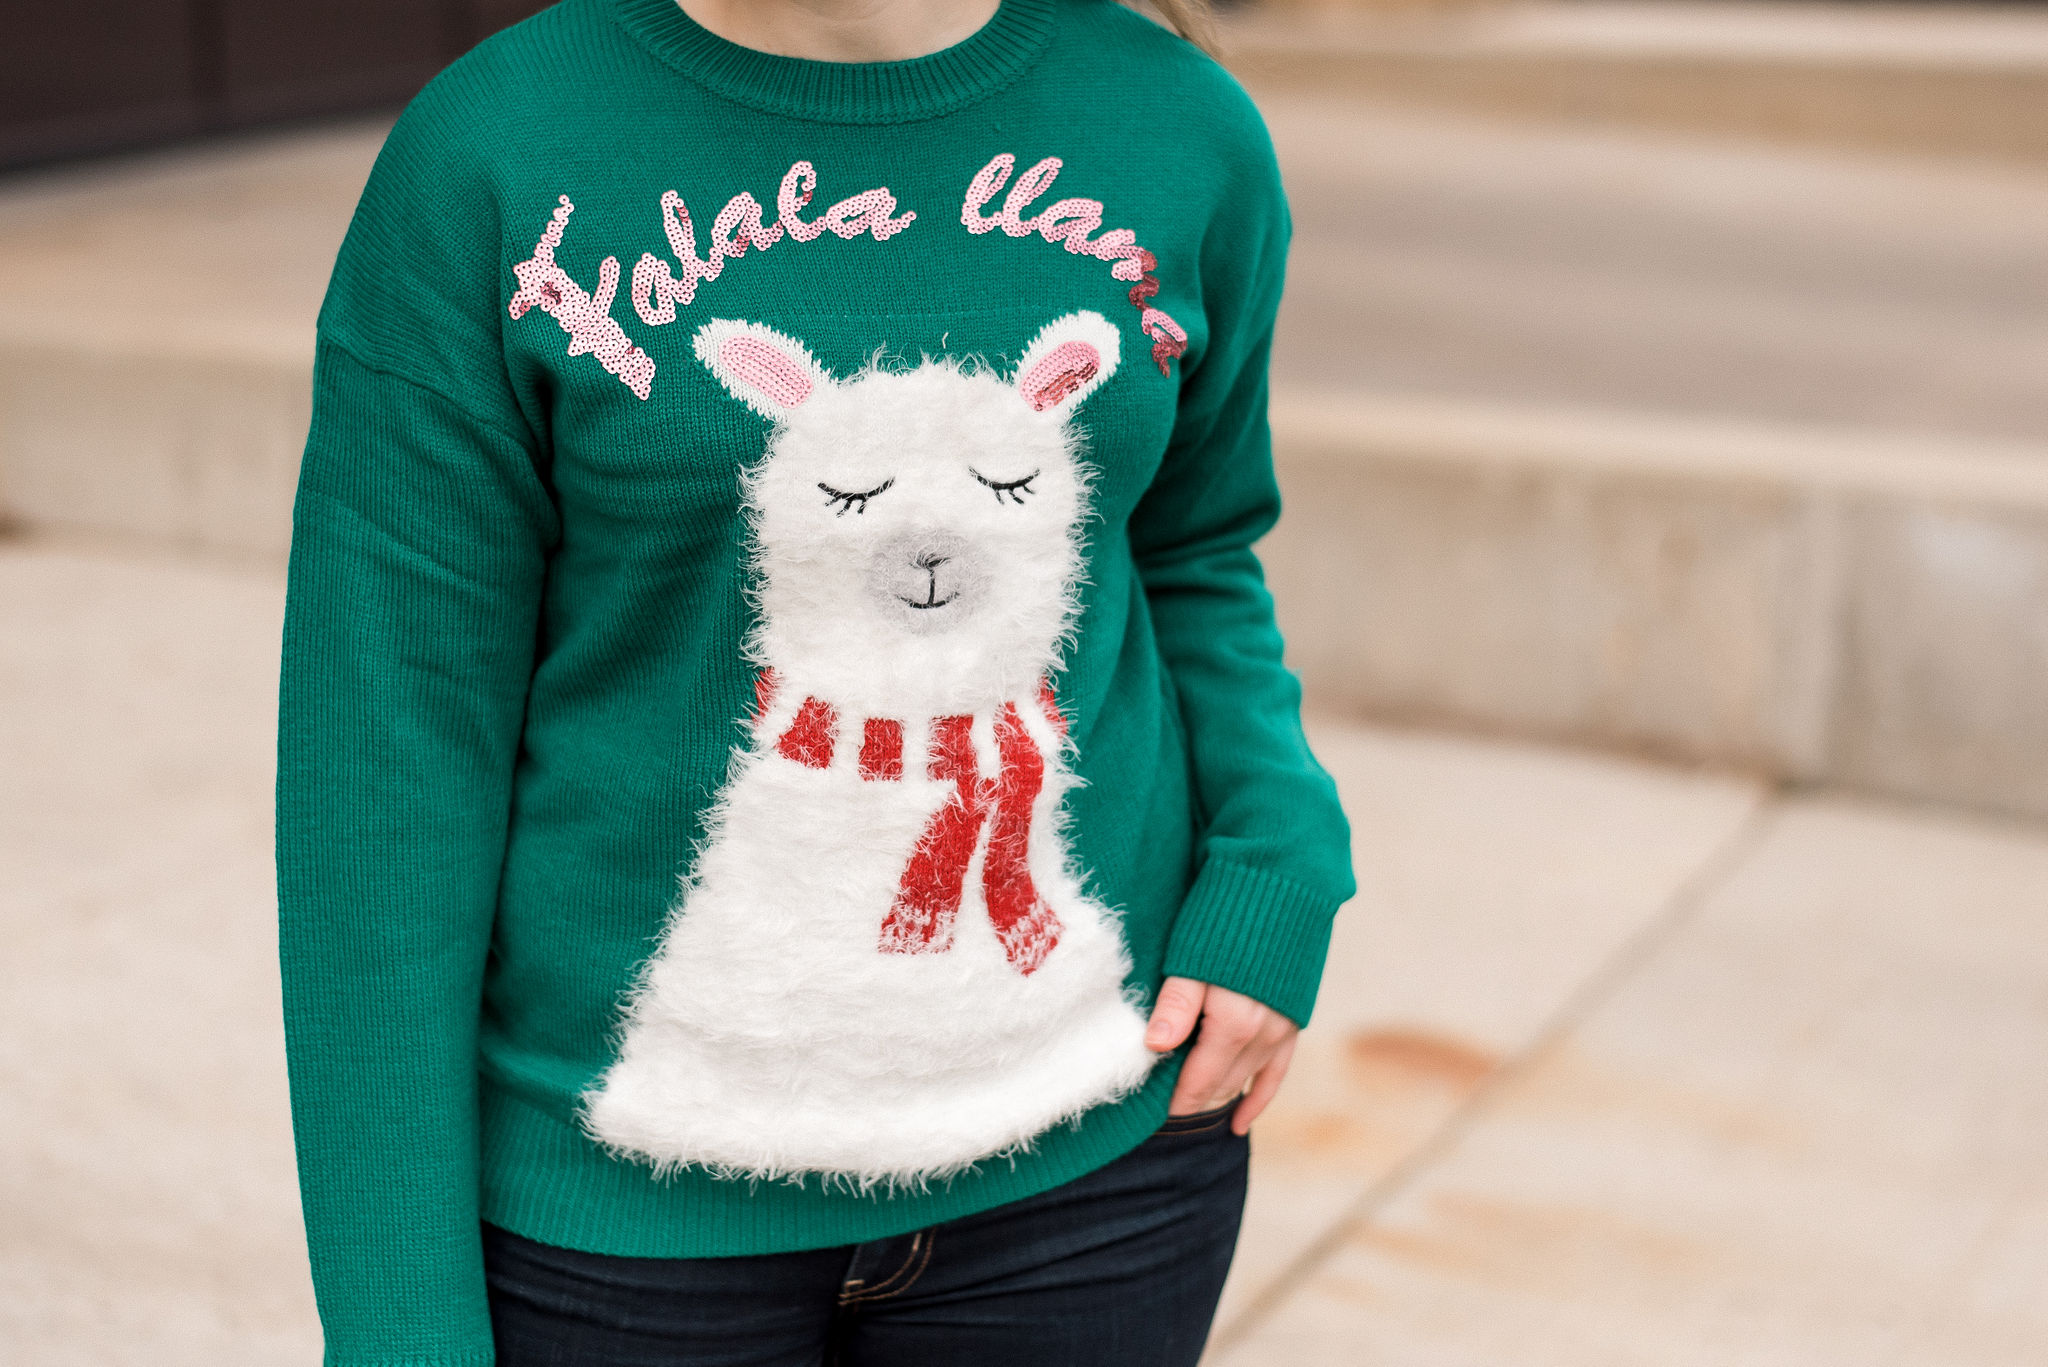 New Look christmas sweater with llama print in green